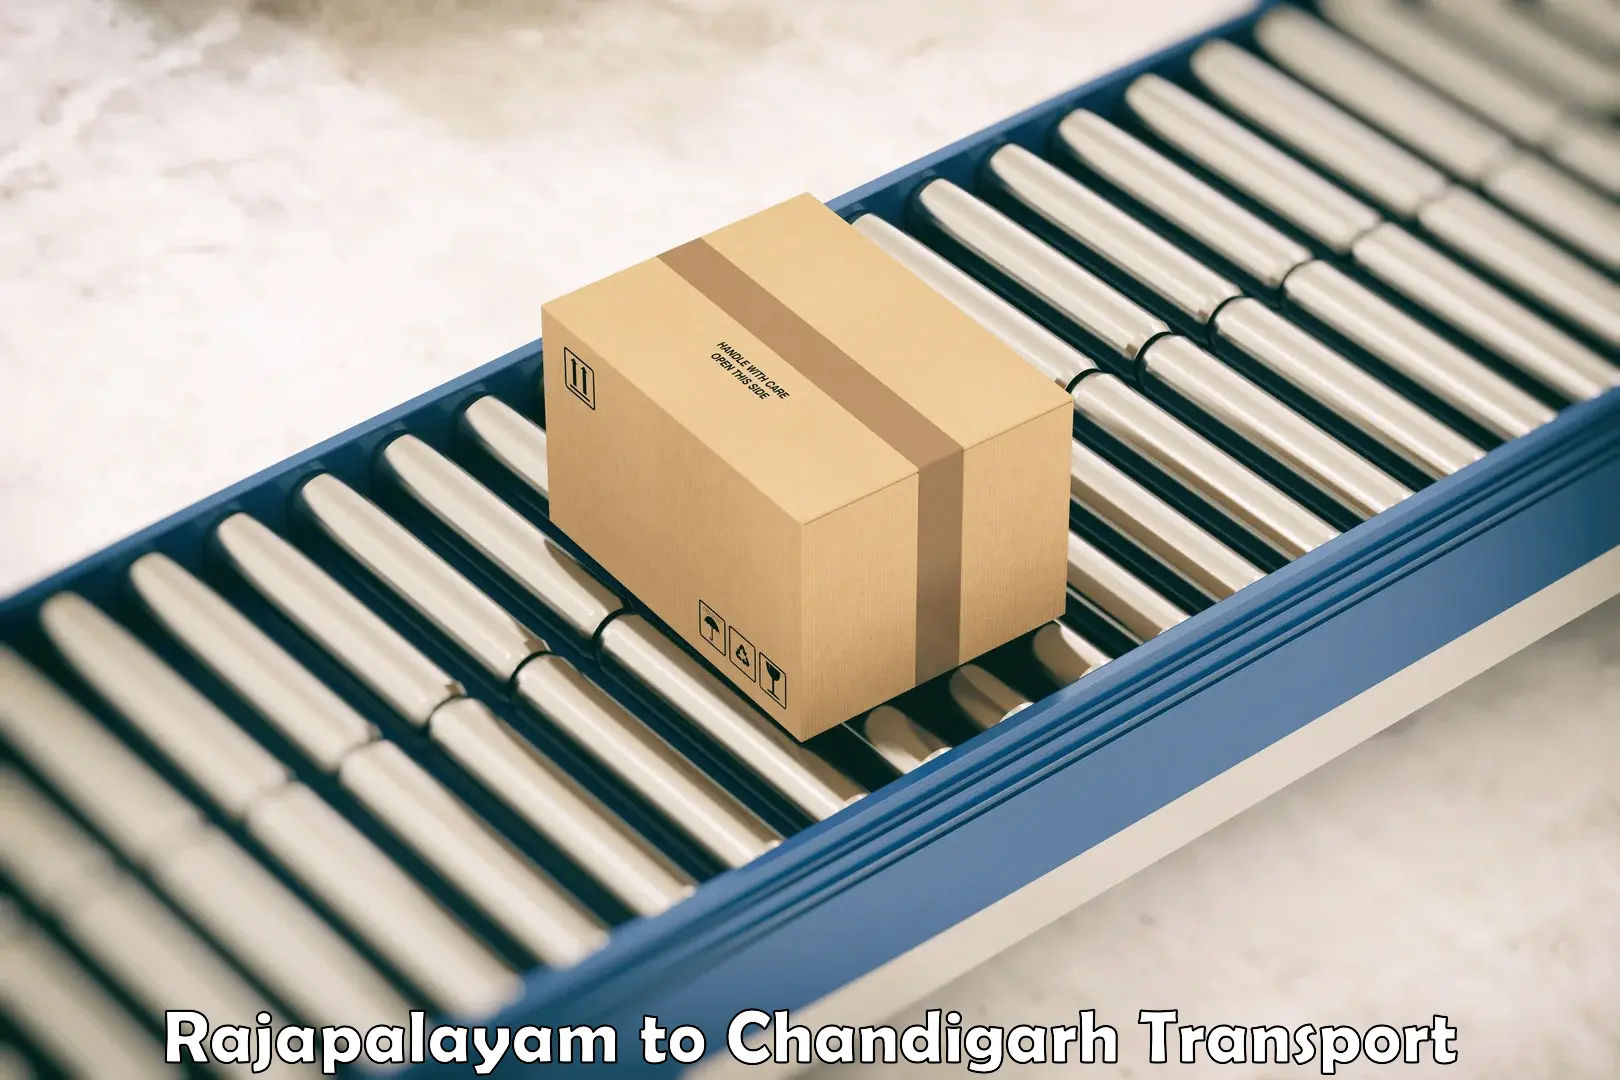 Container transport service Rajapalayam to Chandigarh